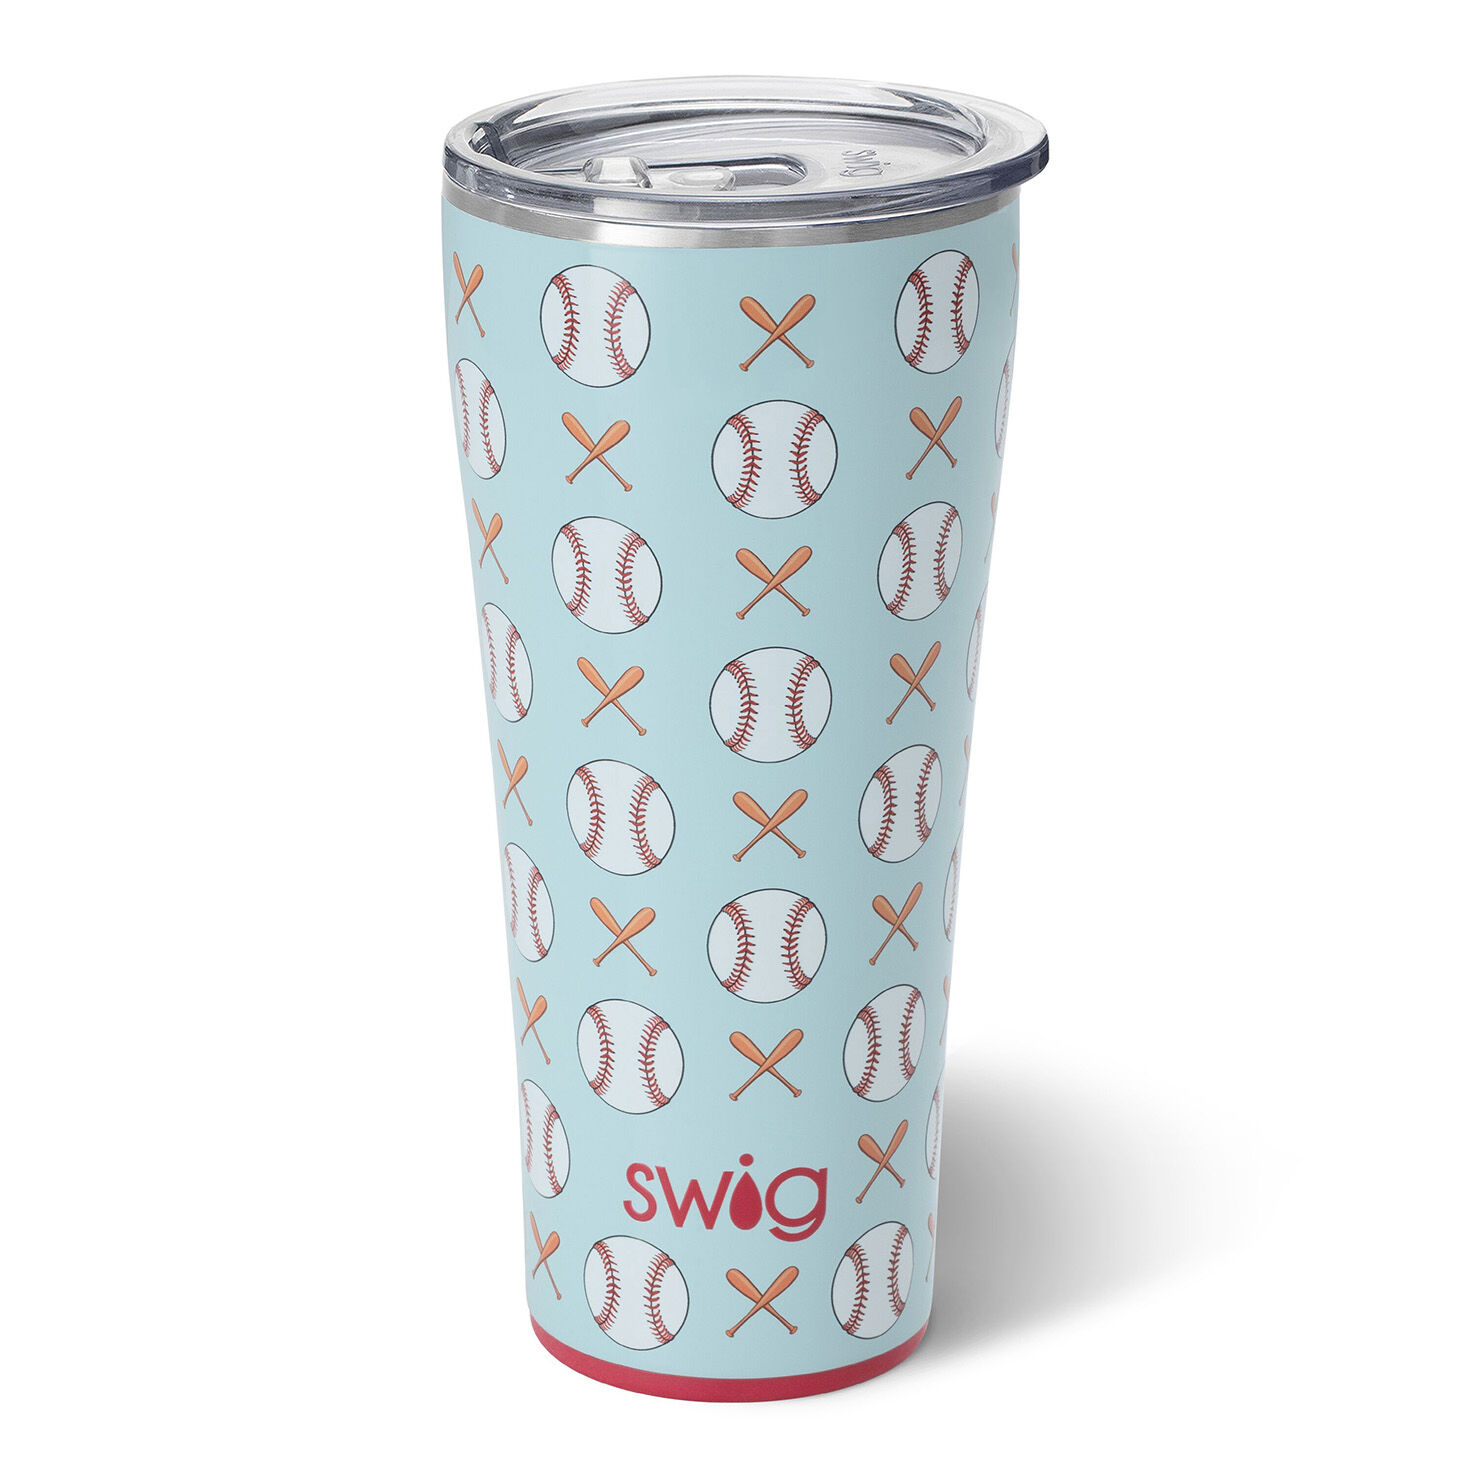 Swig Home Run Stainless Steel Tumbler, 32 oz. for only USD 42.99 | Hallmark